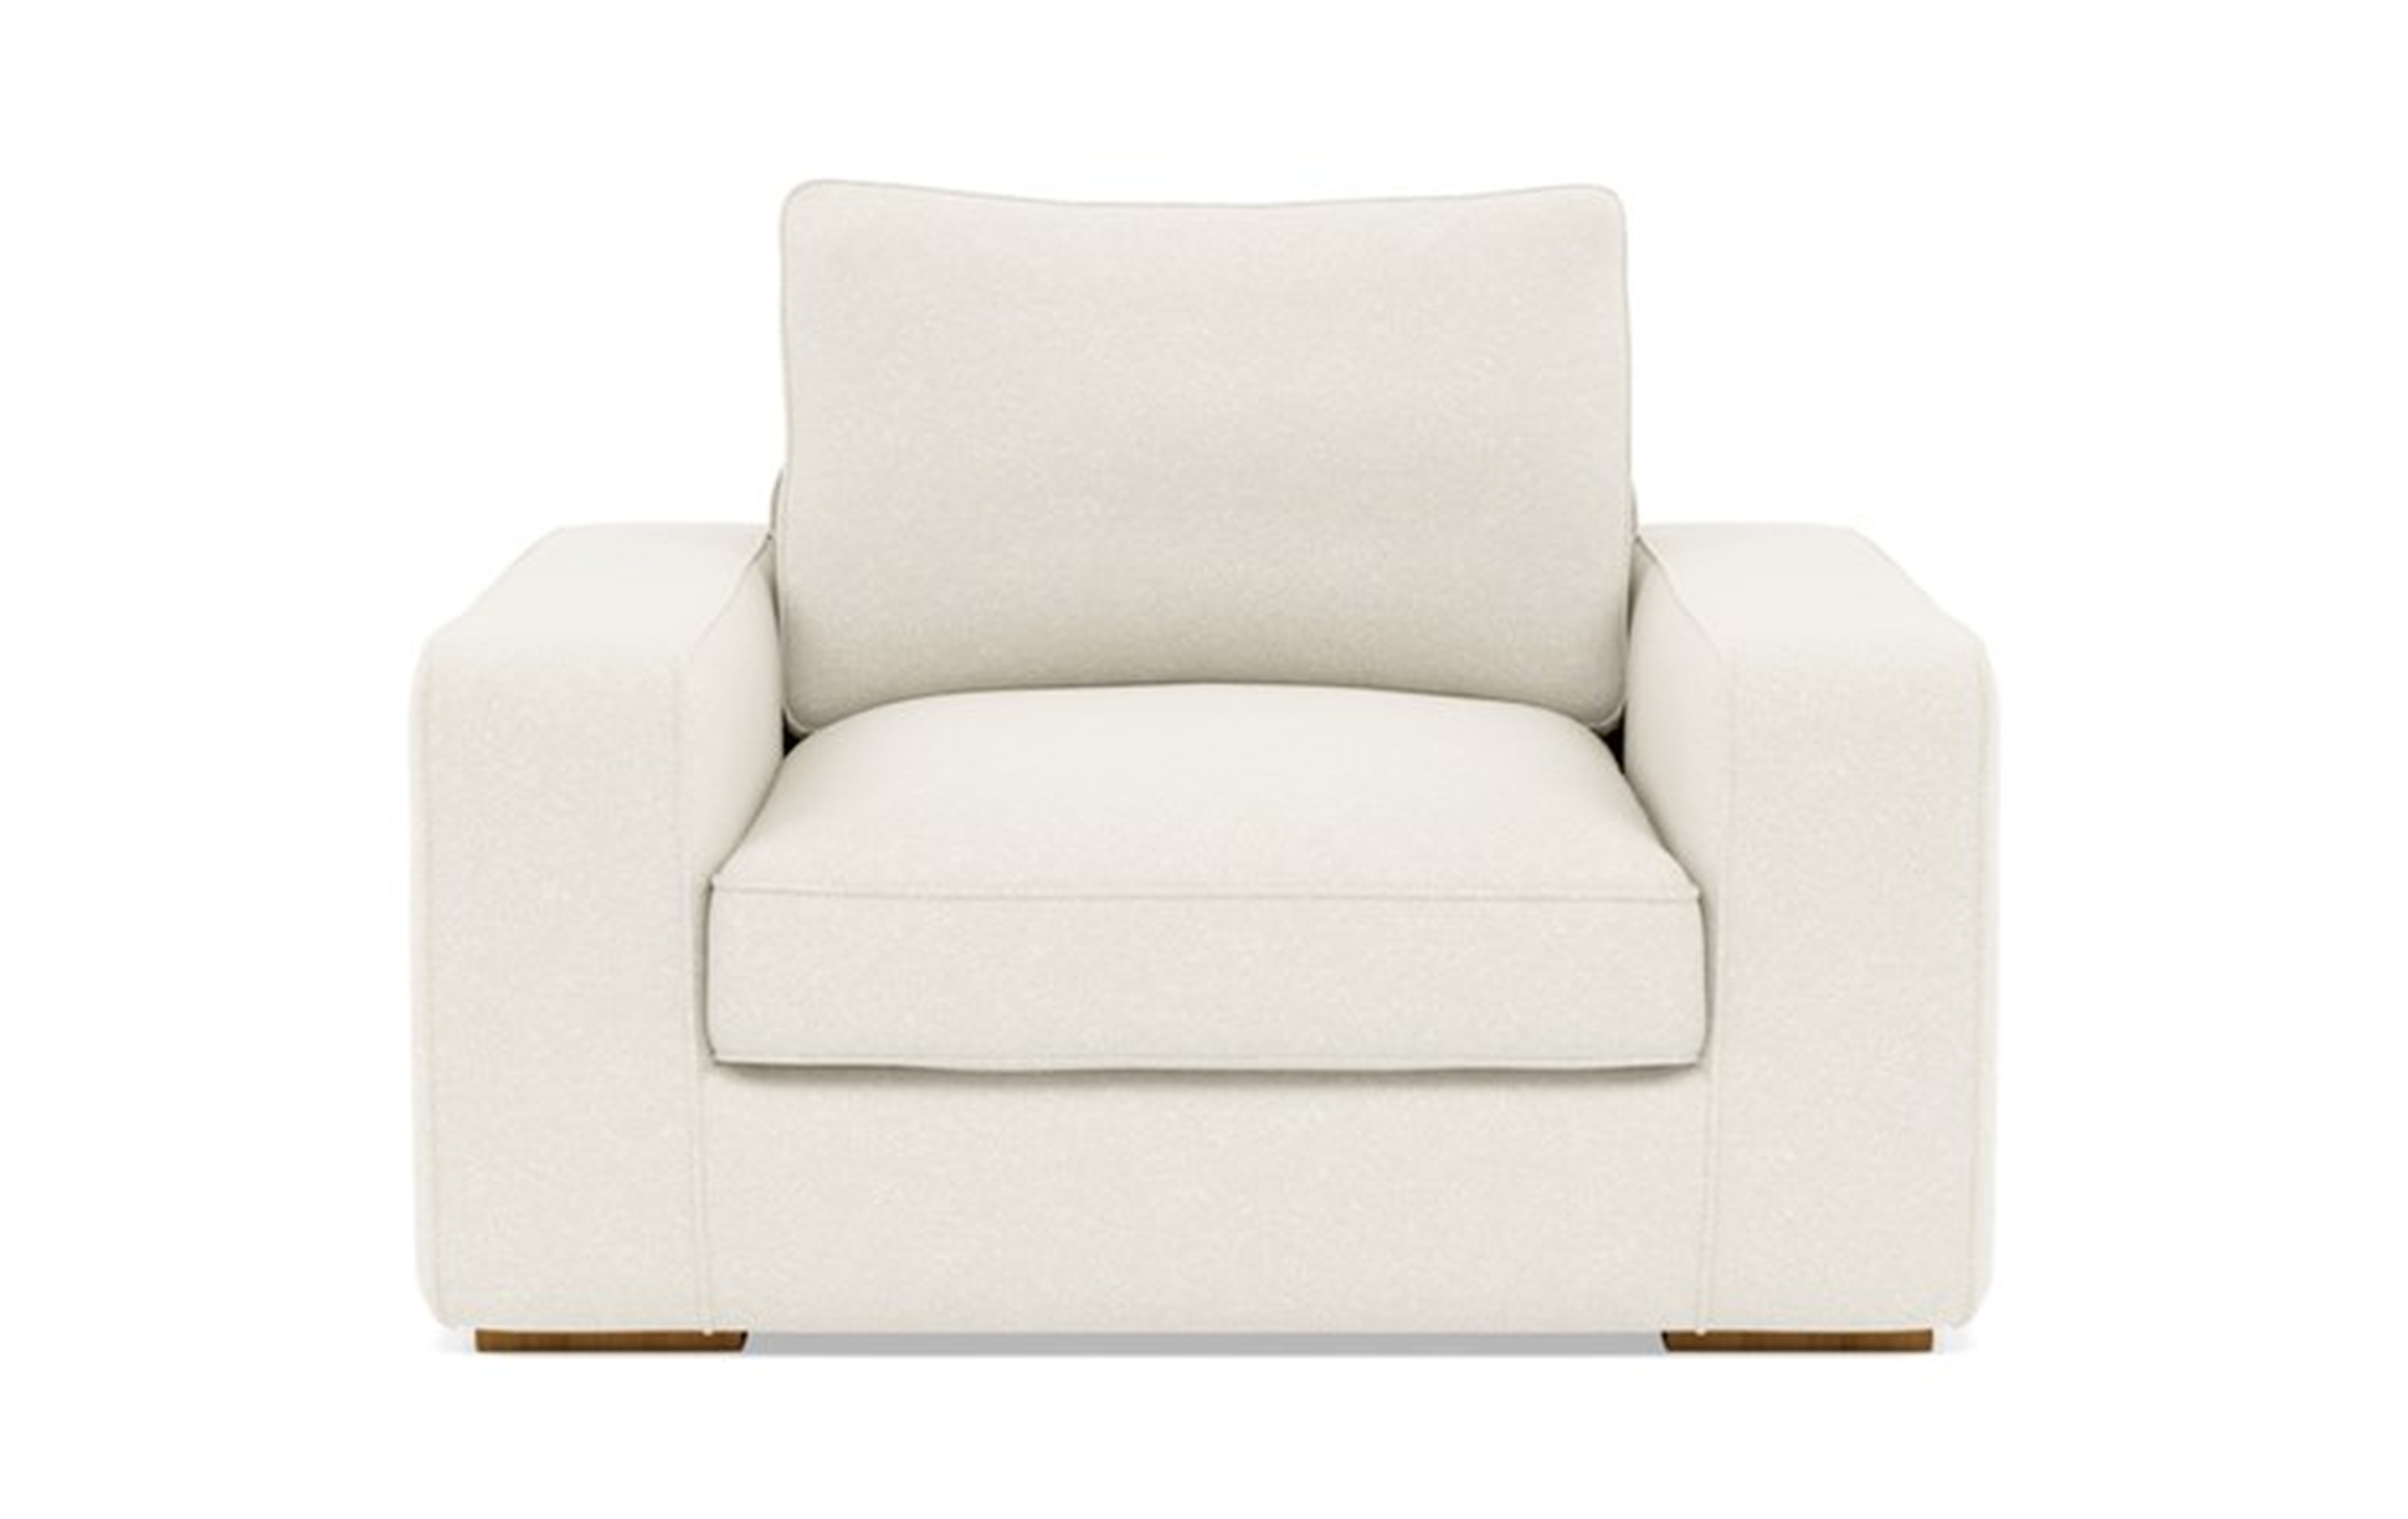 Ainsley Accent Chair with White Cirrus Fabric and Natural Oak legs - Interior Define